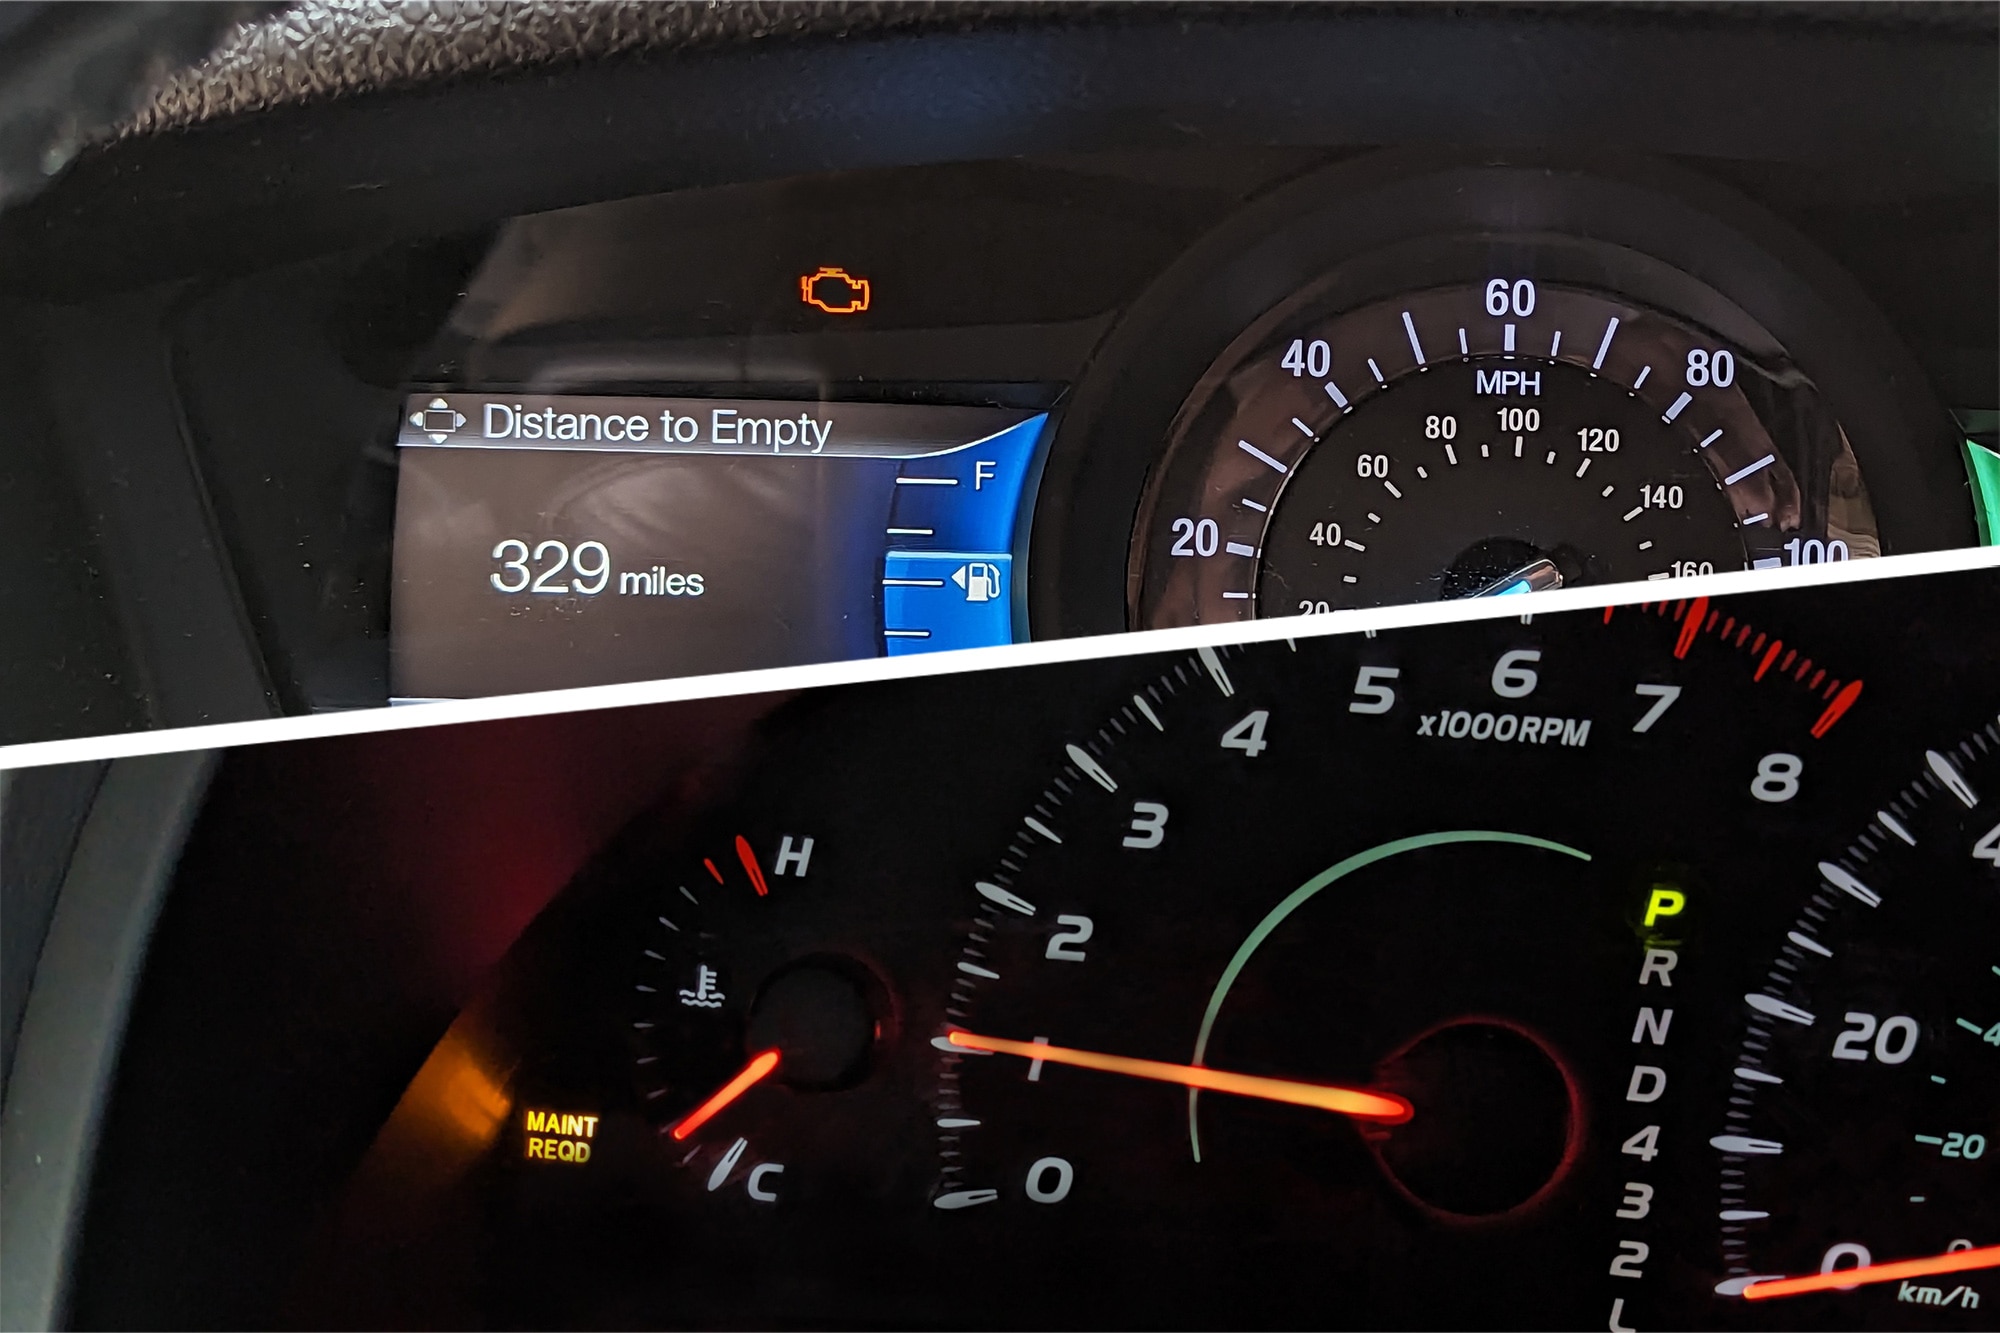 Gauge cluster with check-engine light on and other with maintenance-required light illuminated.